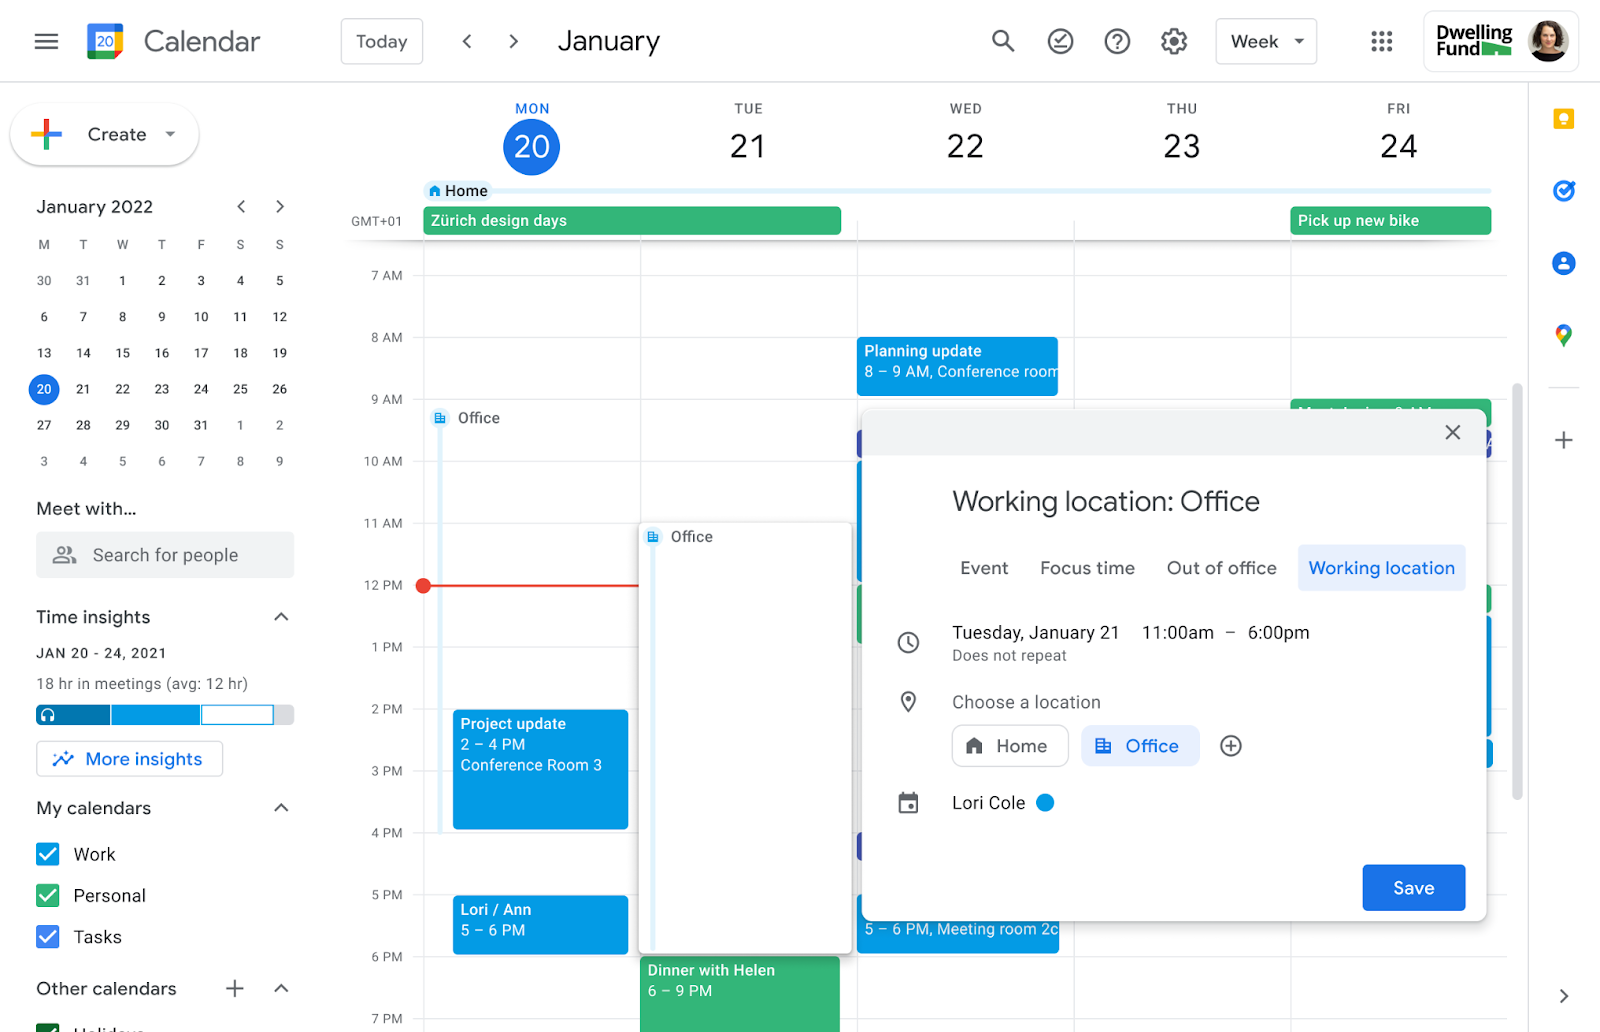 Adding more flexibility to working locations in Google Calendar